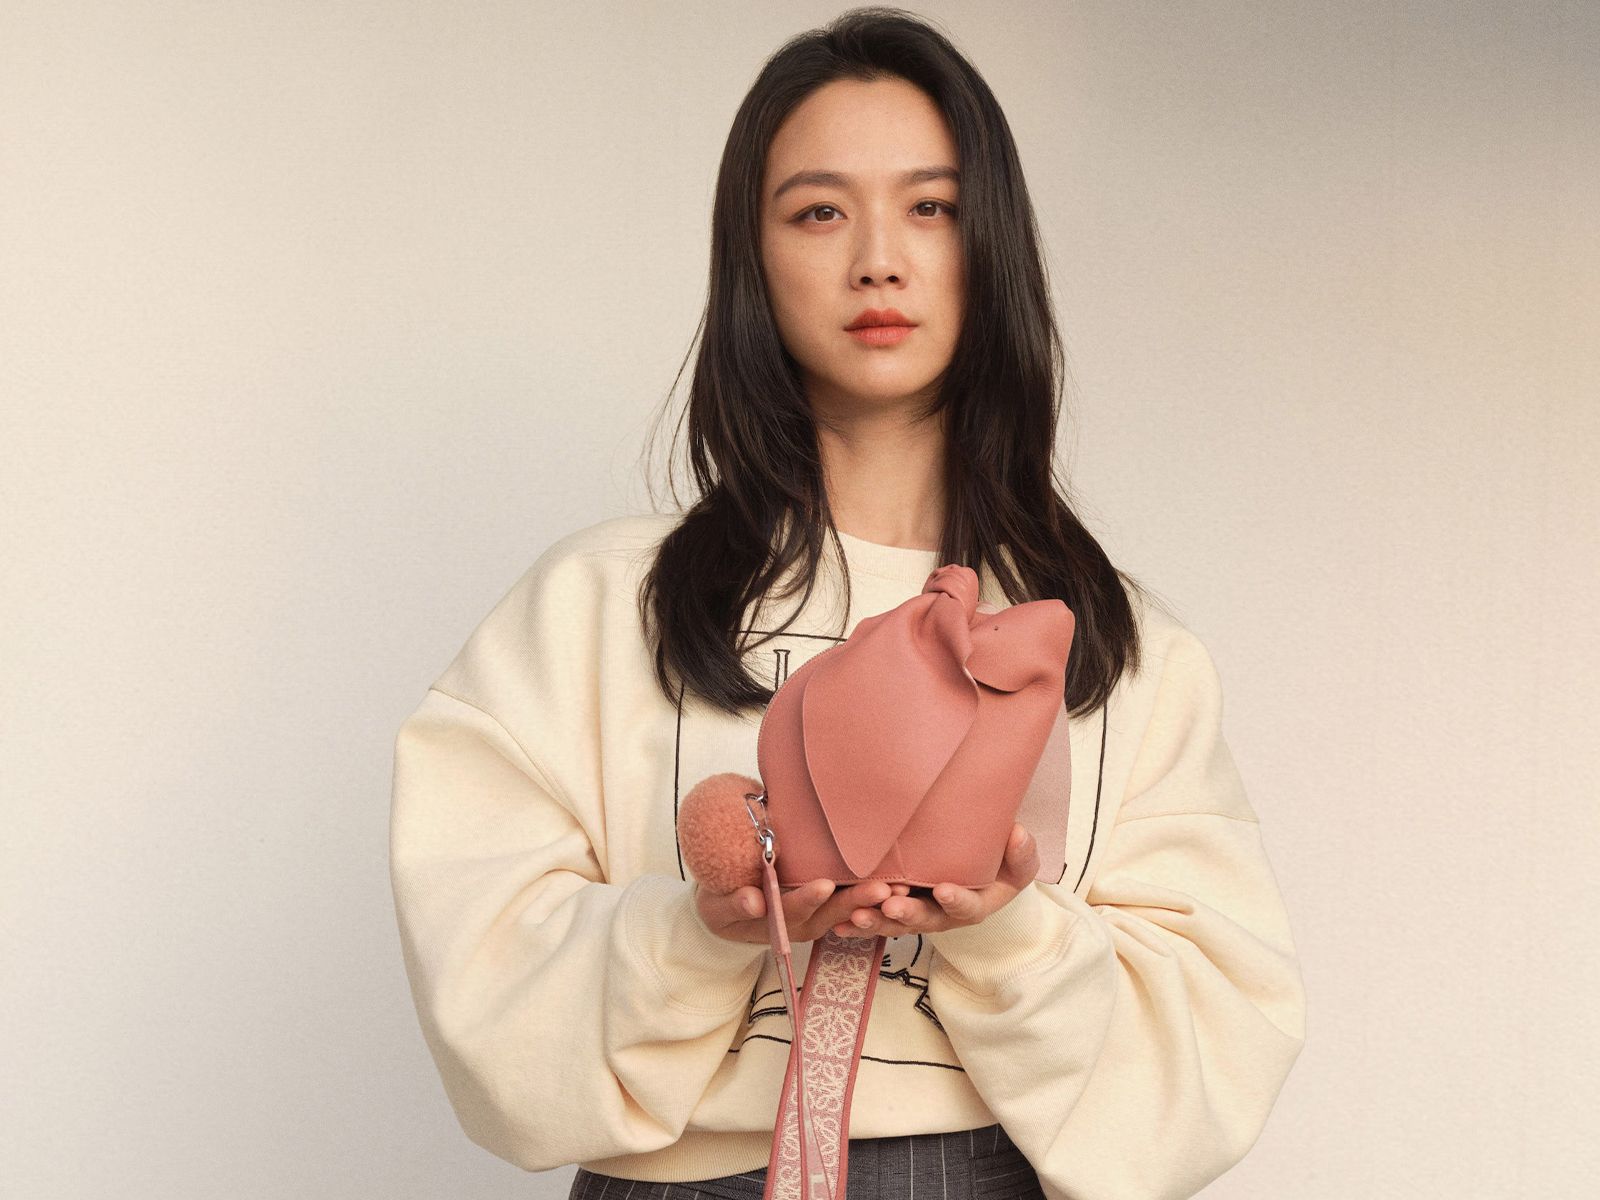 LOEWE brings back its iconic bunny ears to celebrate the Chinese New Year